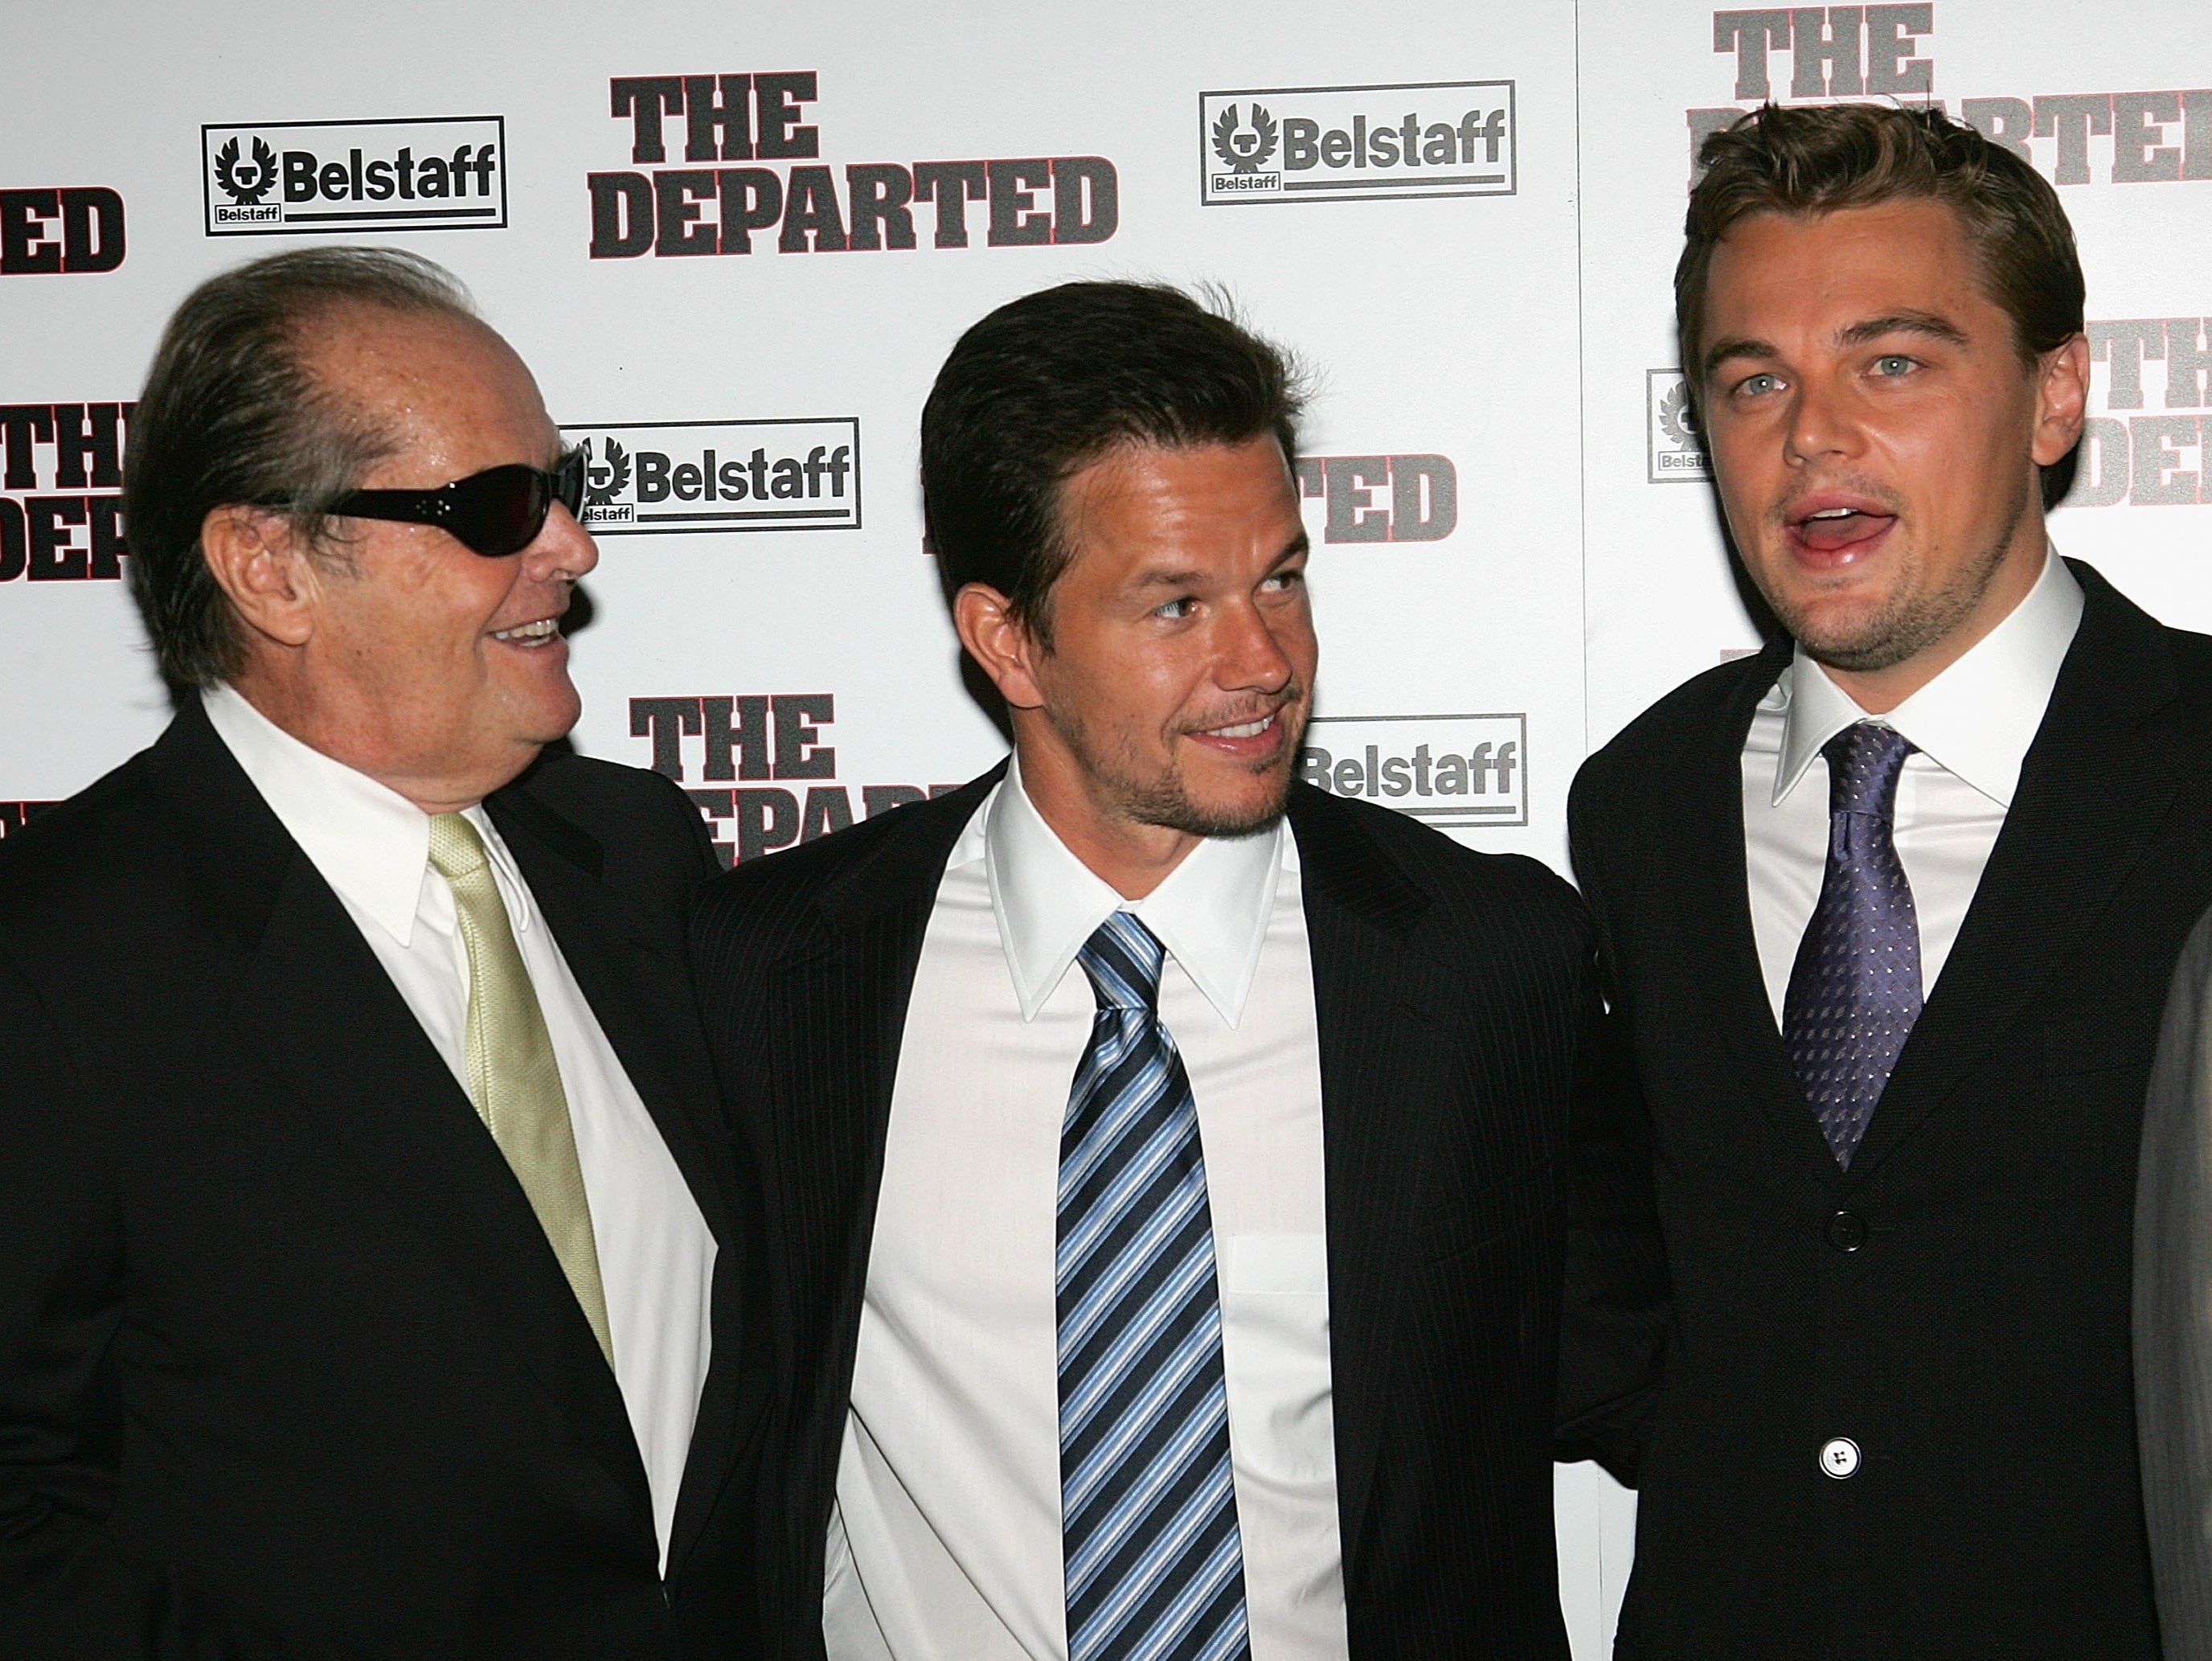 Jack Nicholson, Mark Wahlberg and Leonardo DiCaprio at the New York permiere of Martin Scorsese’s The Departed